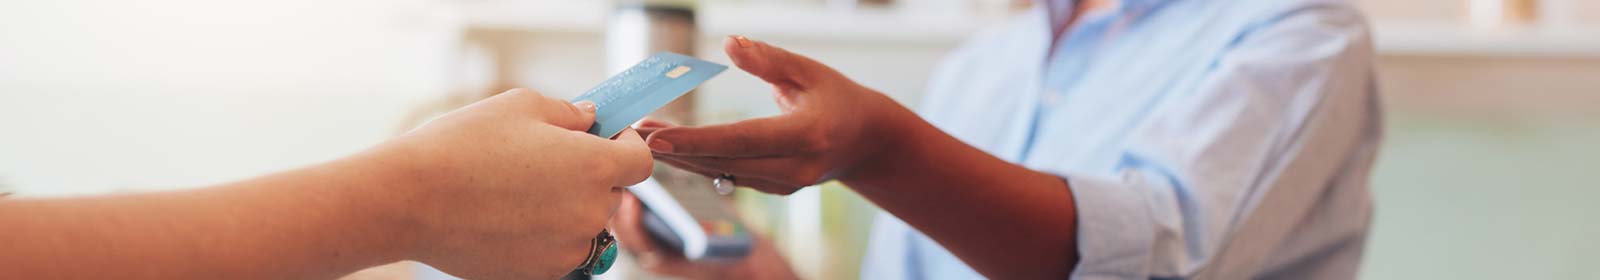 Person using a credit or debit card in a place of business